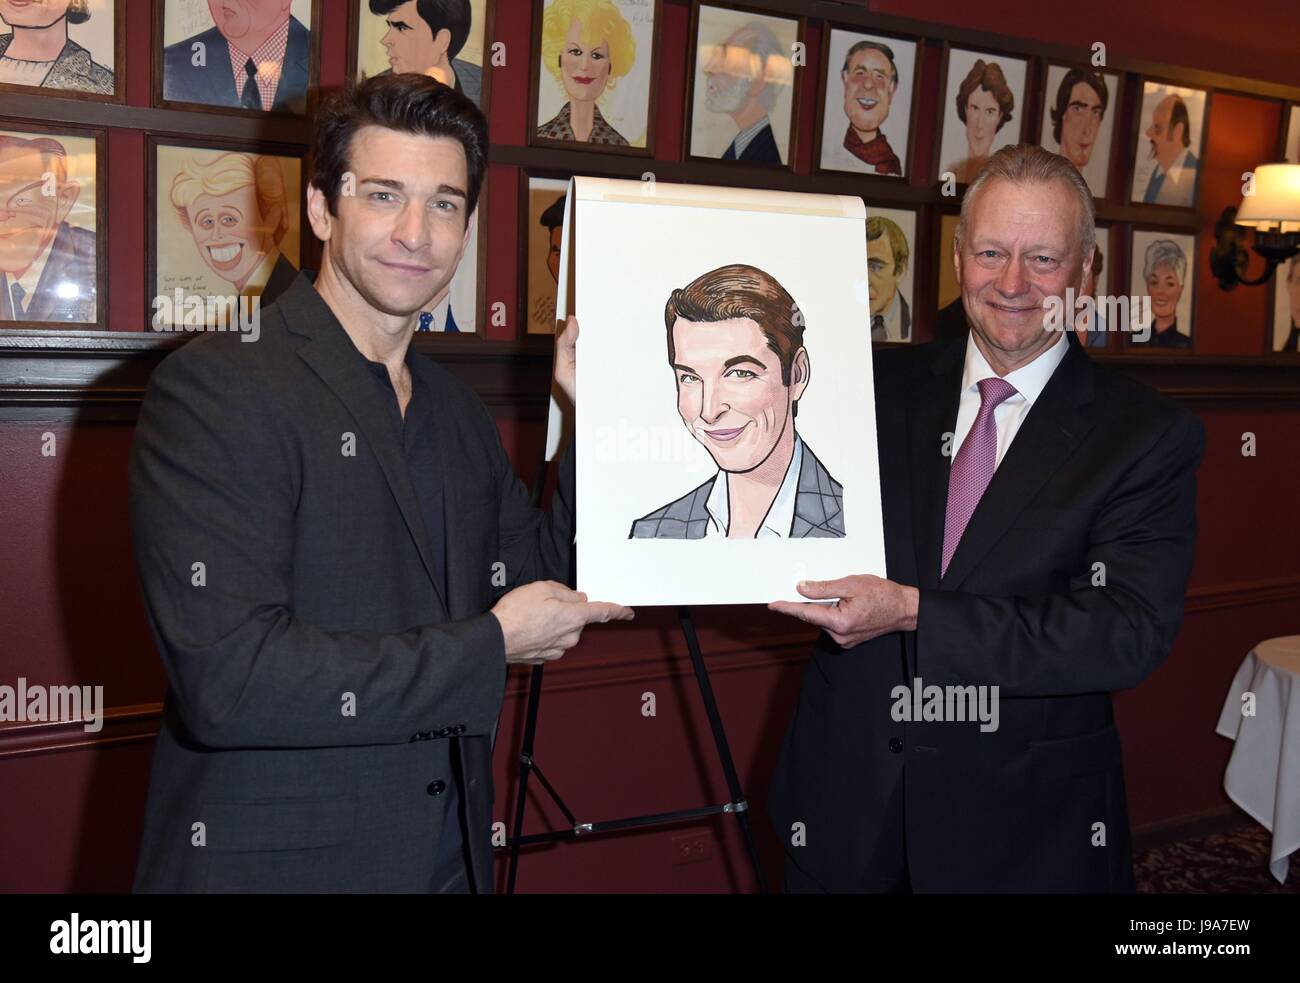 New York, NY, USA. 31st May, 2017. Andy Karl, Max Klimavicius at a public appearance for Andy Karl Honored With A Sardi's Portrait, Sardi's, New York, NY May 31, 2017. Credit: Derek Storm/Everett Collection/Alamy Live News Stock Photo